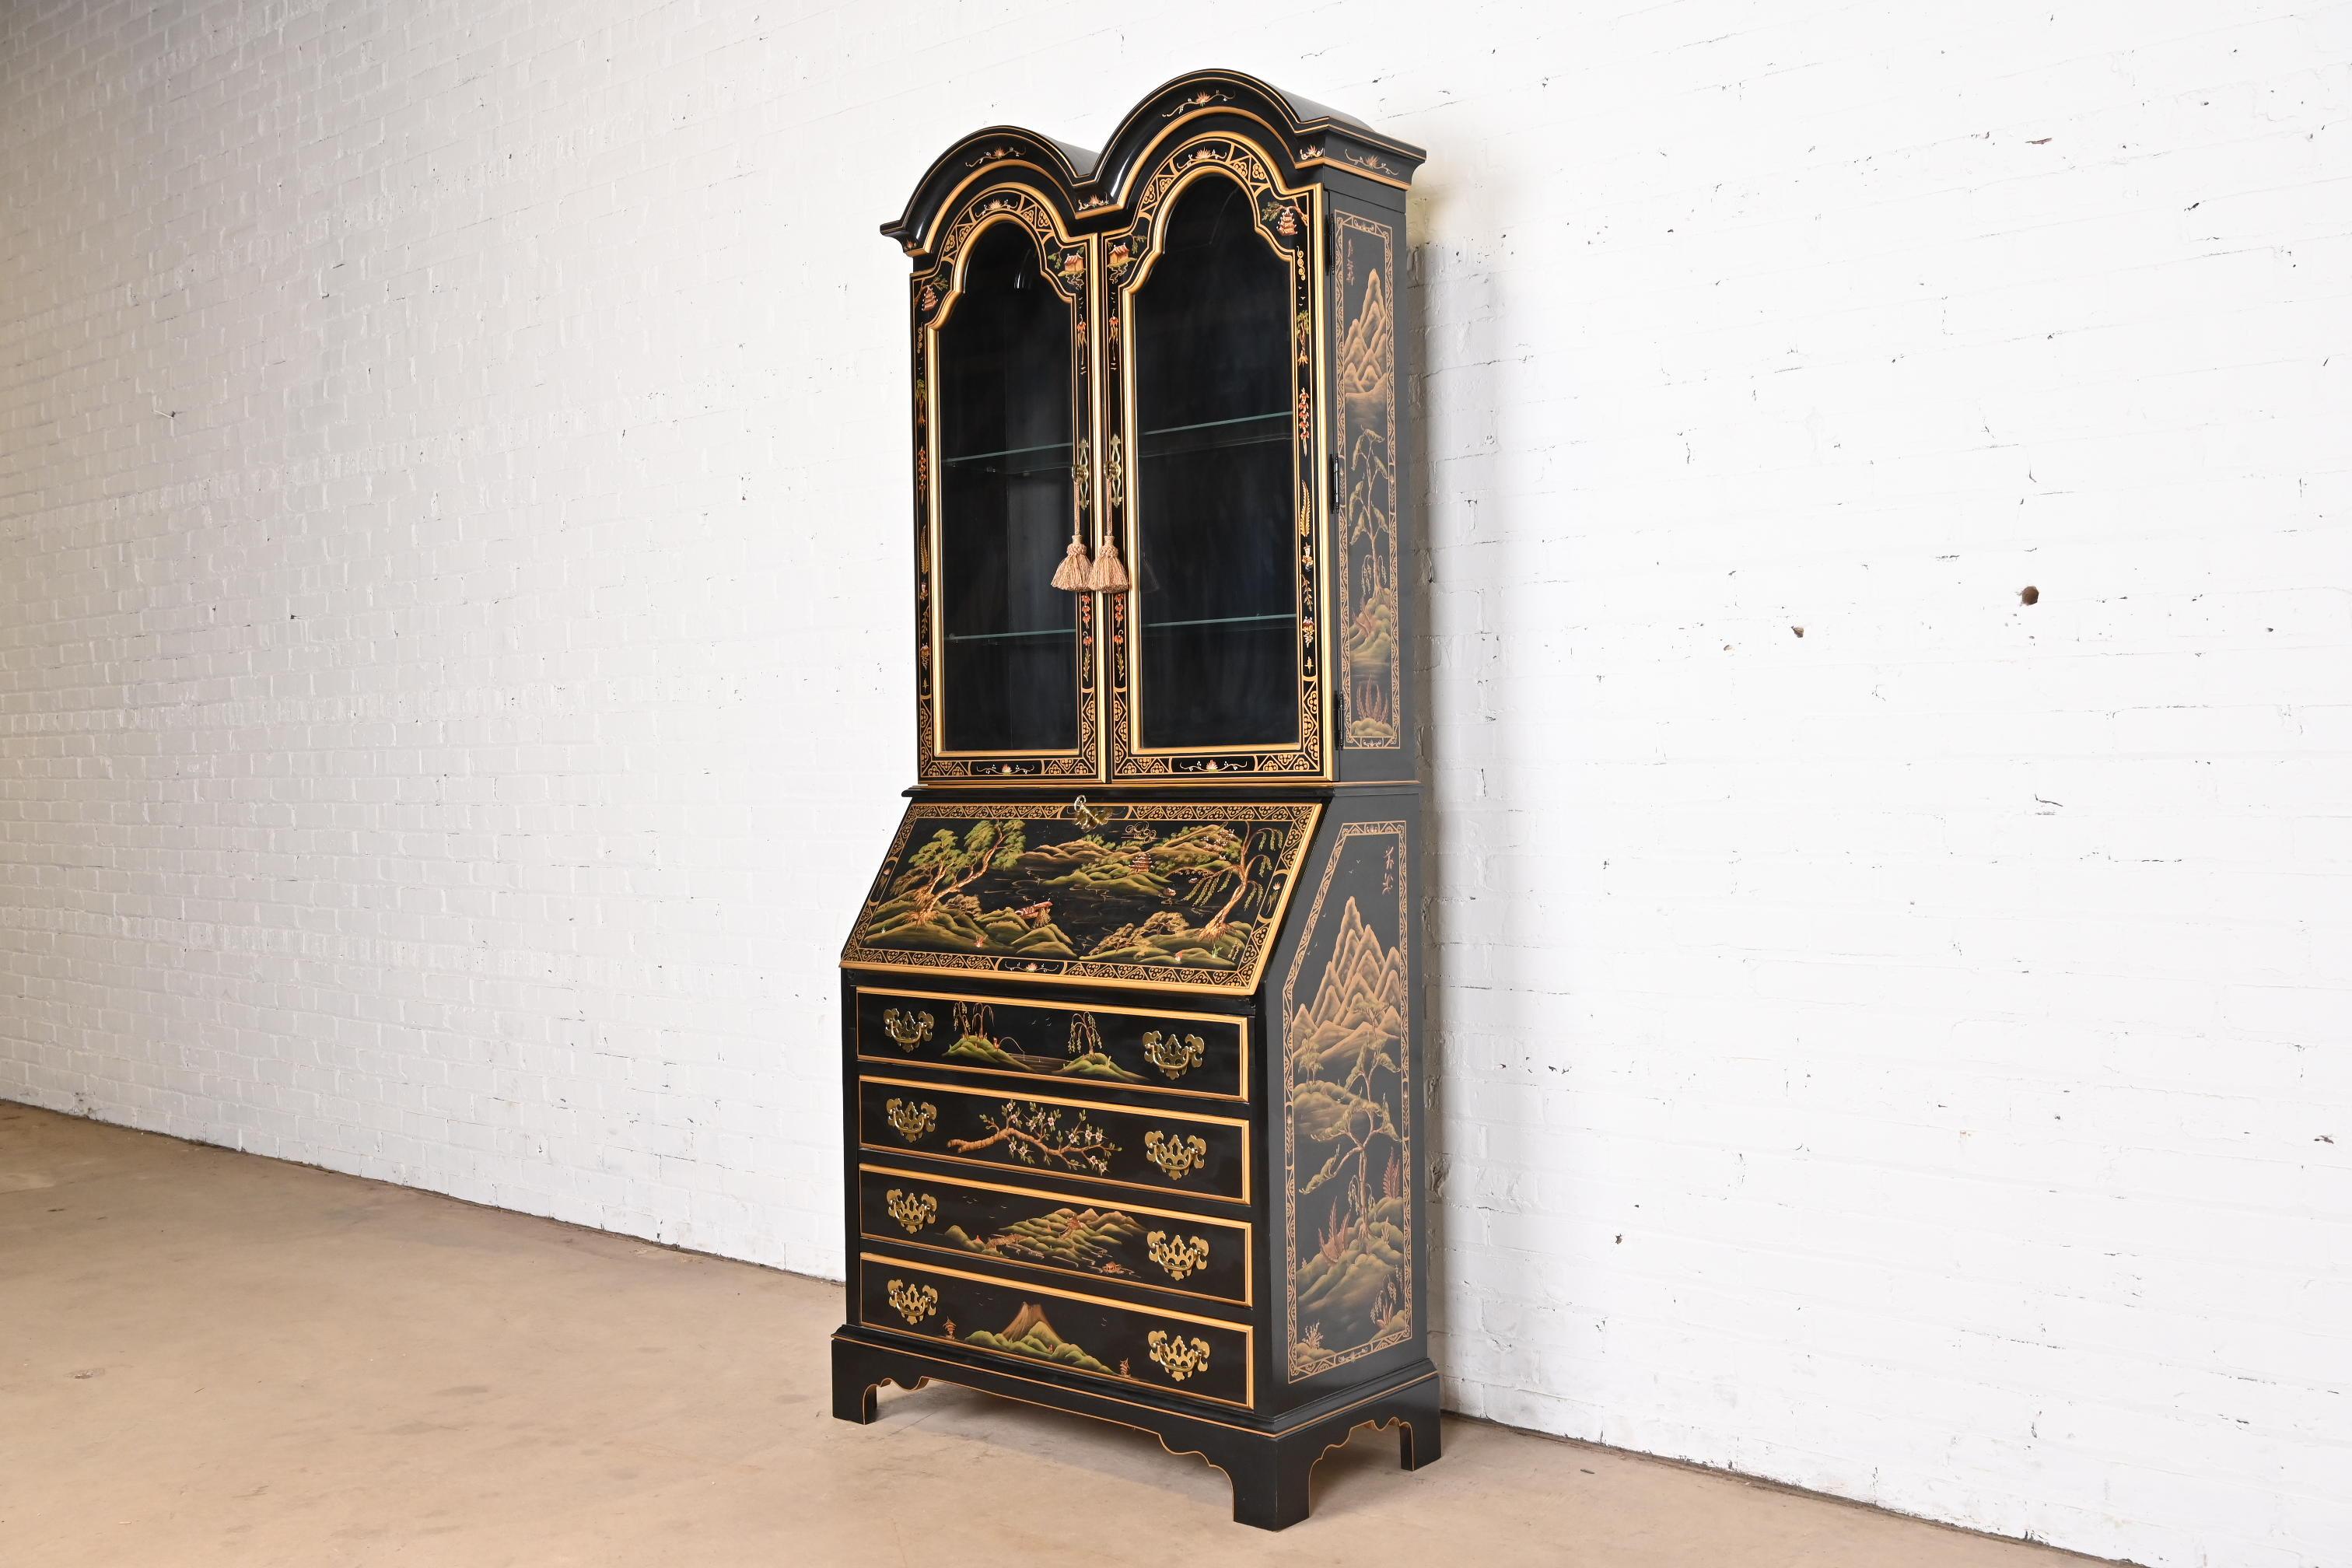 A gorgeous Georgian Chinoiserie style bureau with drop front secretary desk and lighted bookcase hutch top

By Jasper Furniture Company

USA, Late 20th Century

Black lacquered walnut, with hand-painted Asian scenes, glass front doors, and original